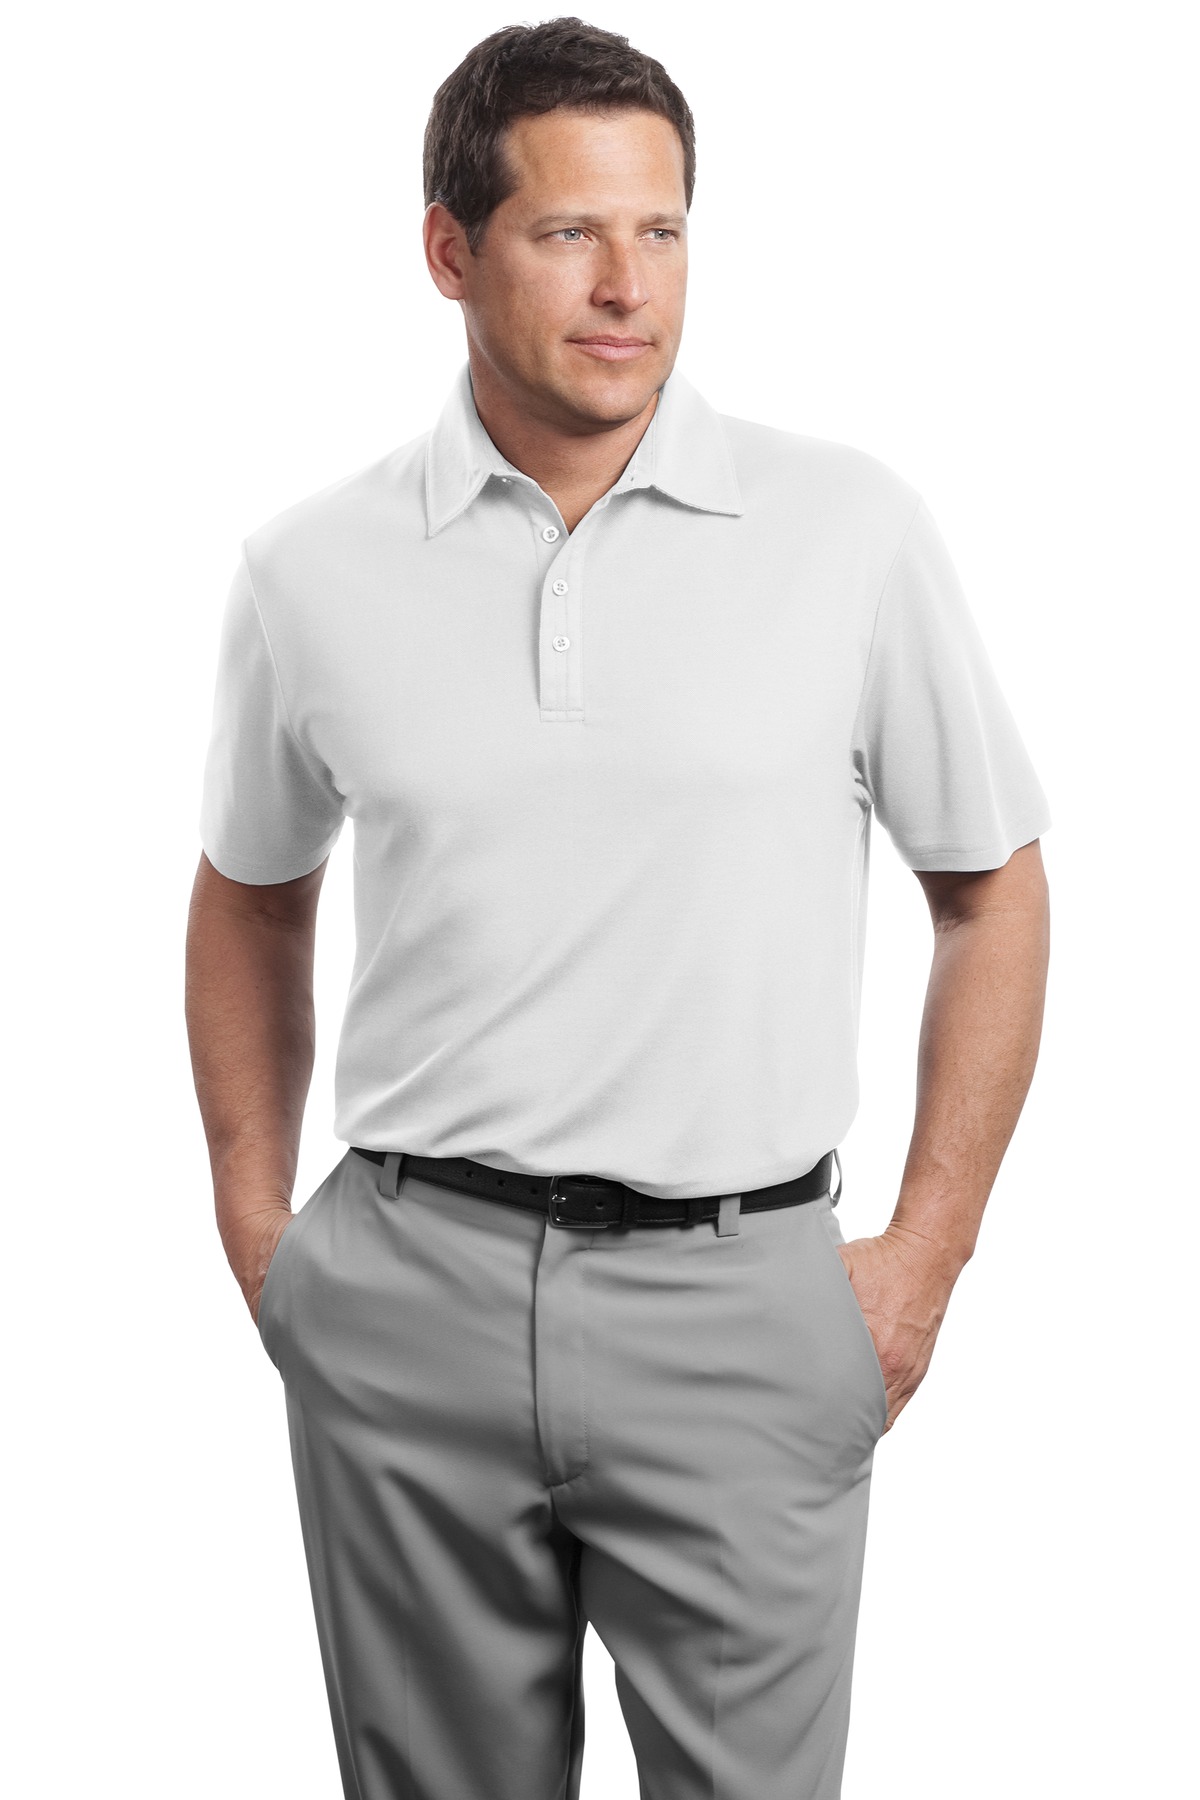 DISCONTINUED Red House - Contrast Stitch Performance Pique Polo - RH49